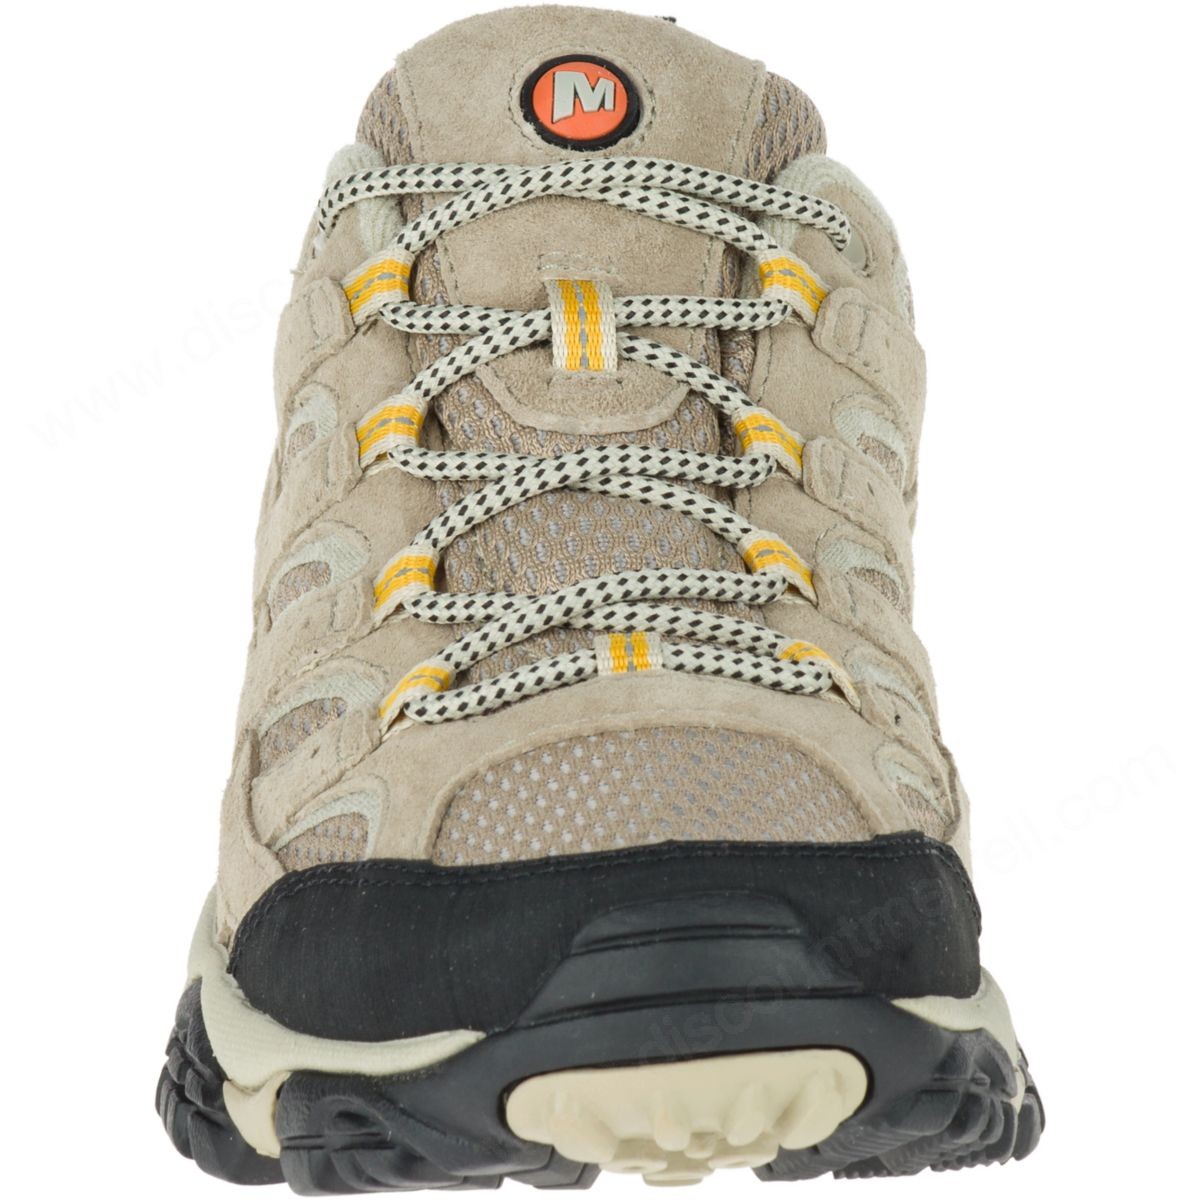 Merrell Woman's Moab Mother Of All Boots™ Ventilator Wide Width Taupe - -4